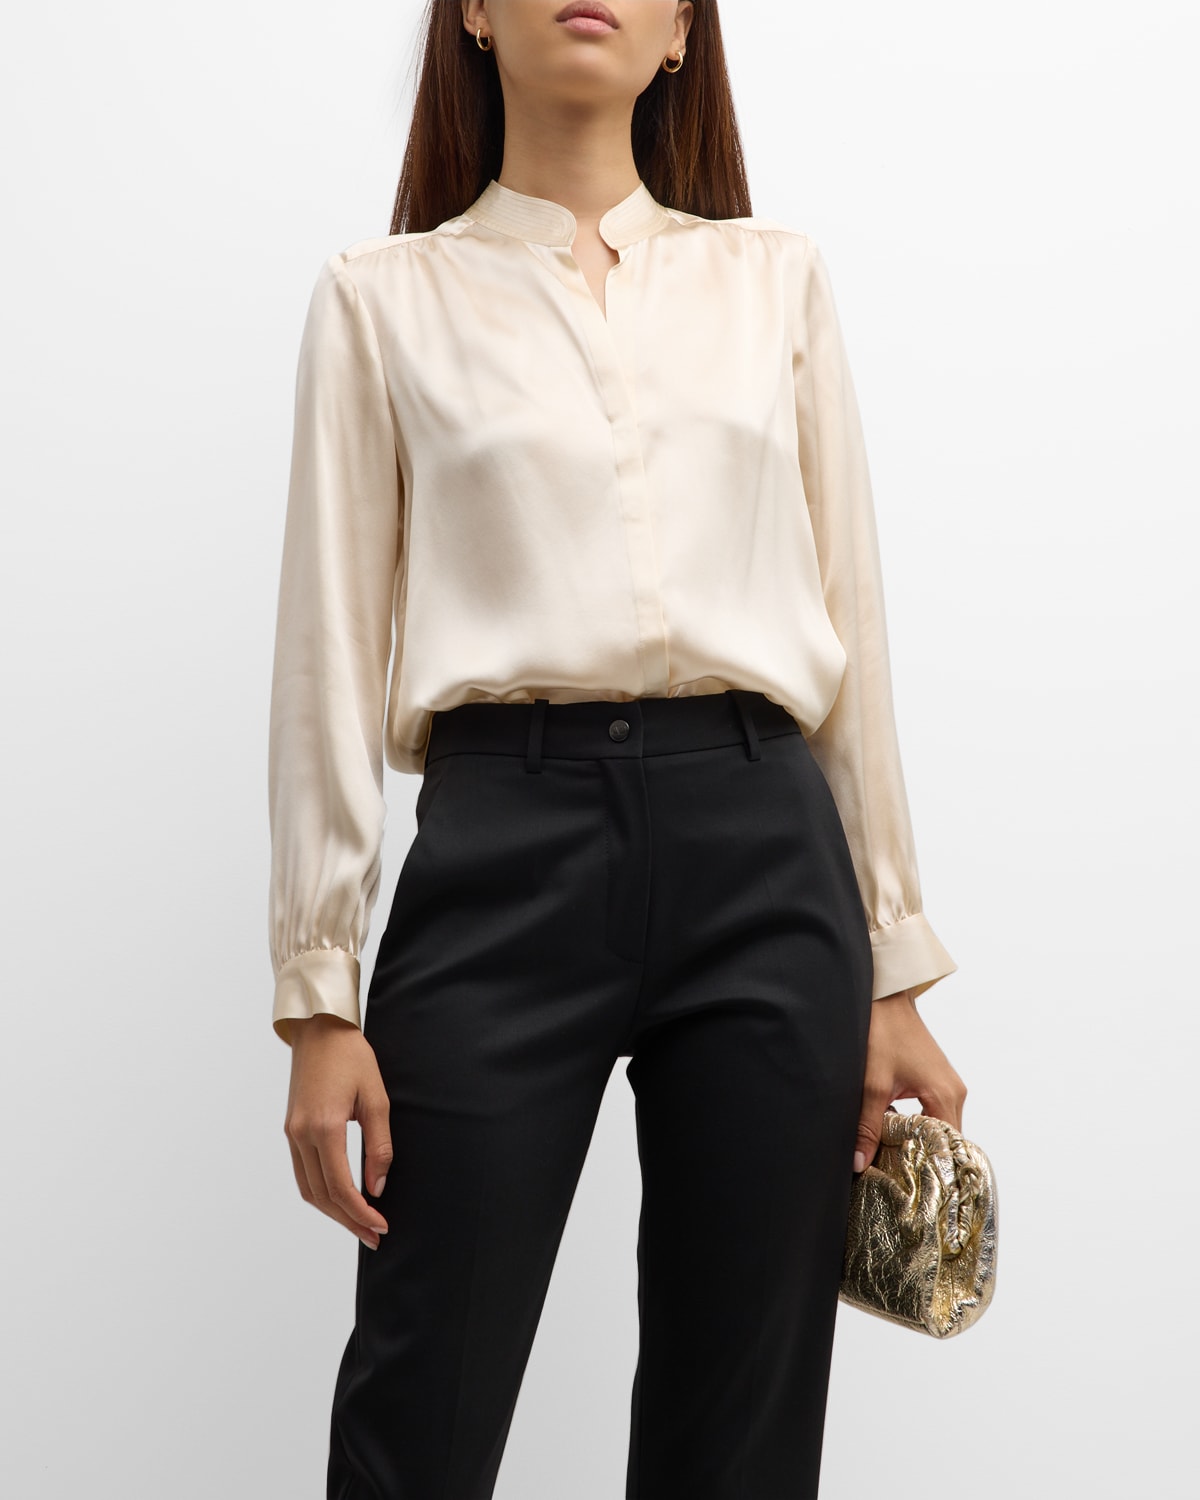 L'AGENCE Bianca Blouse in Black Cherry